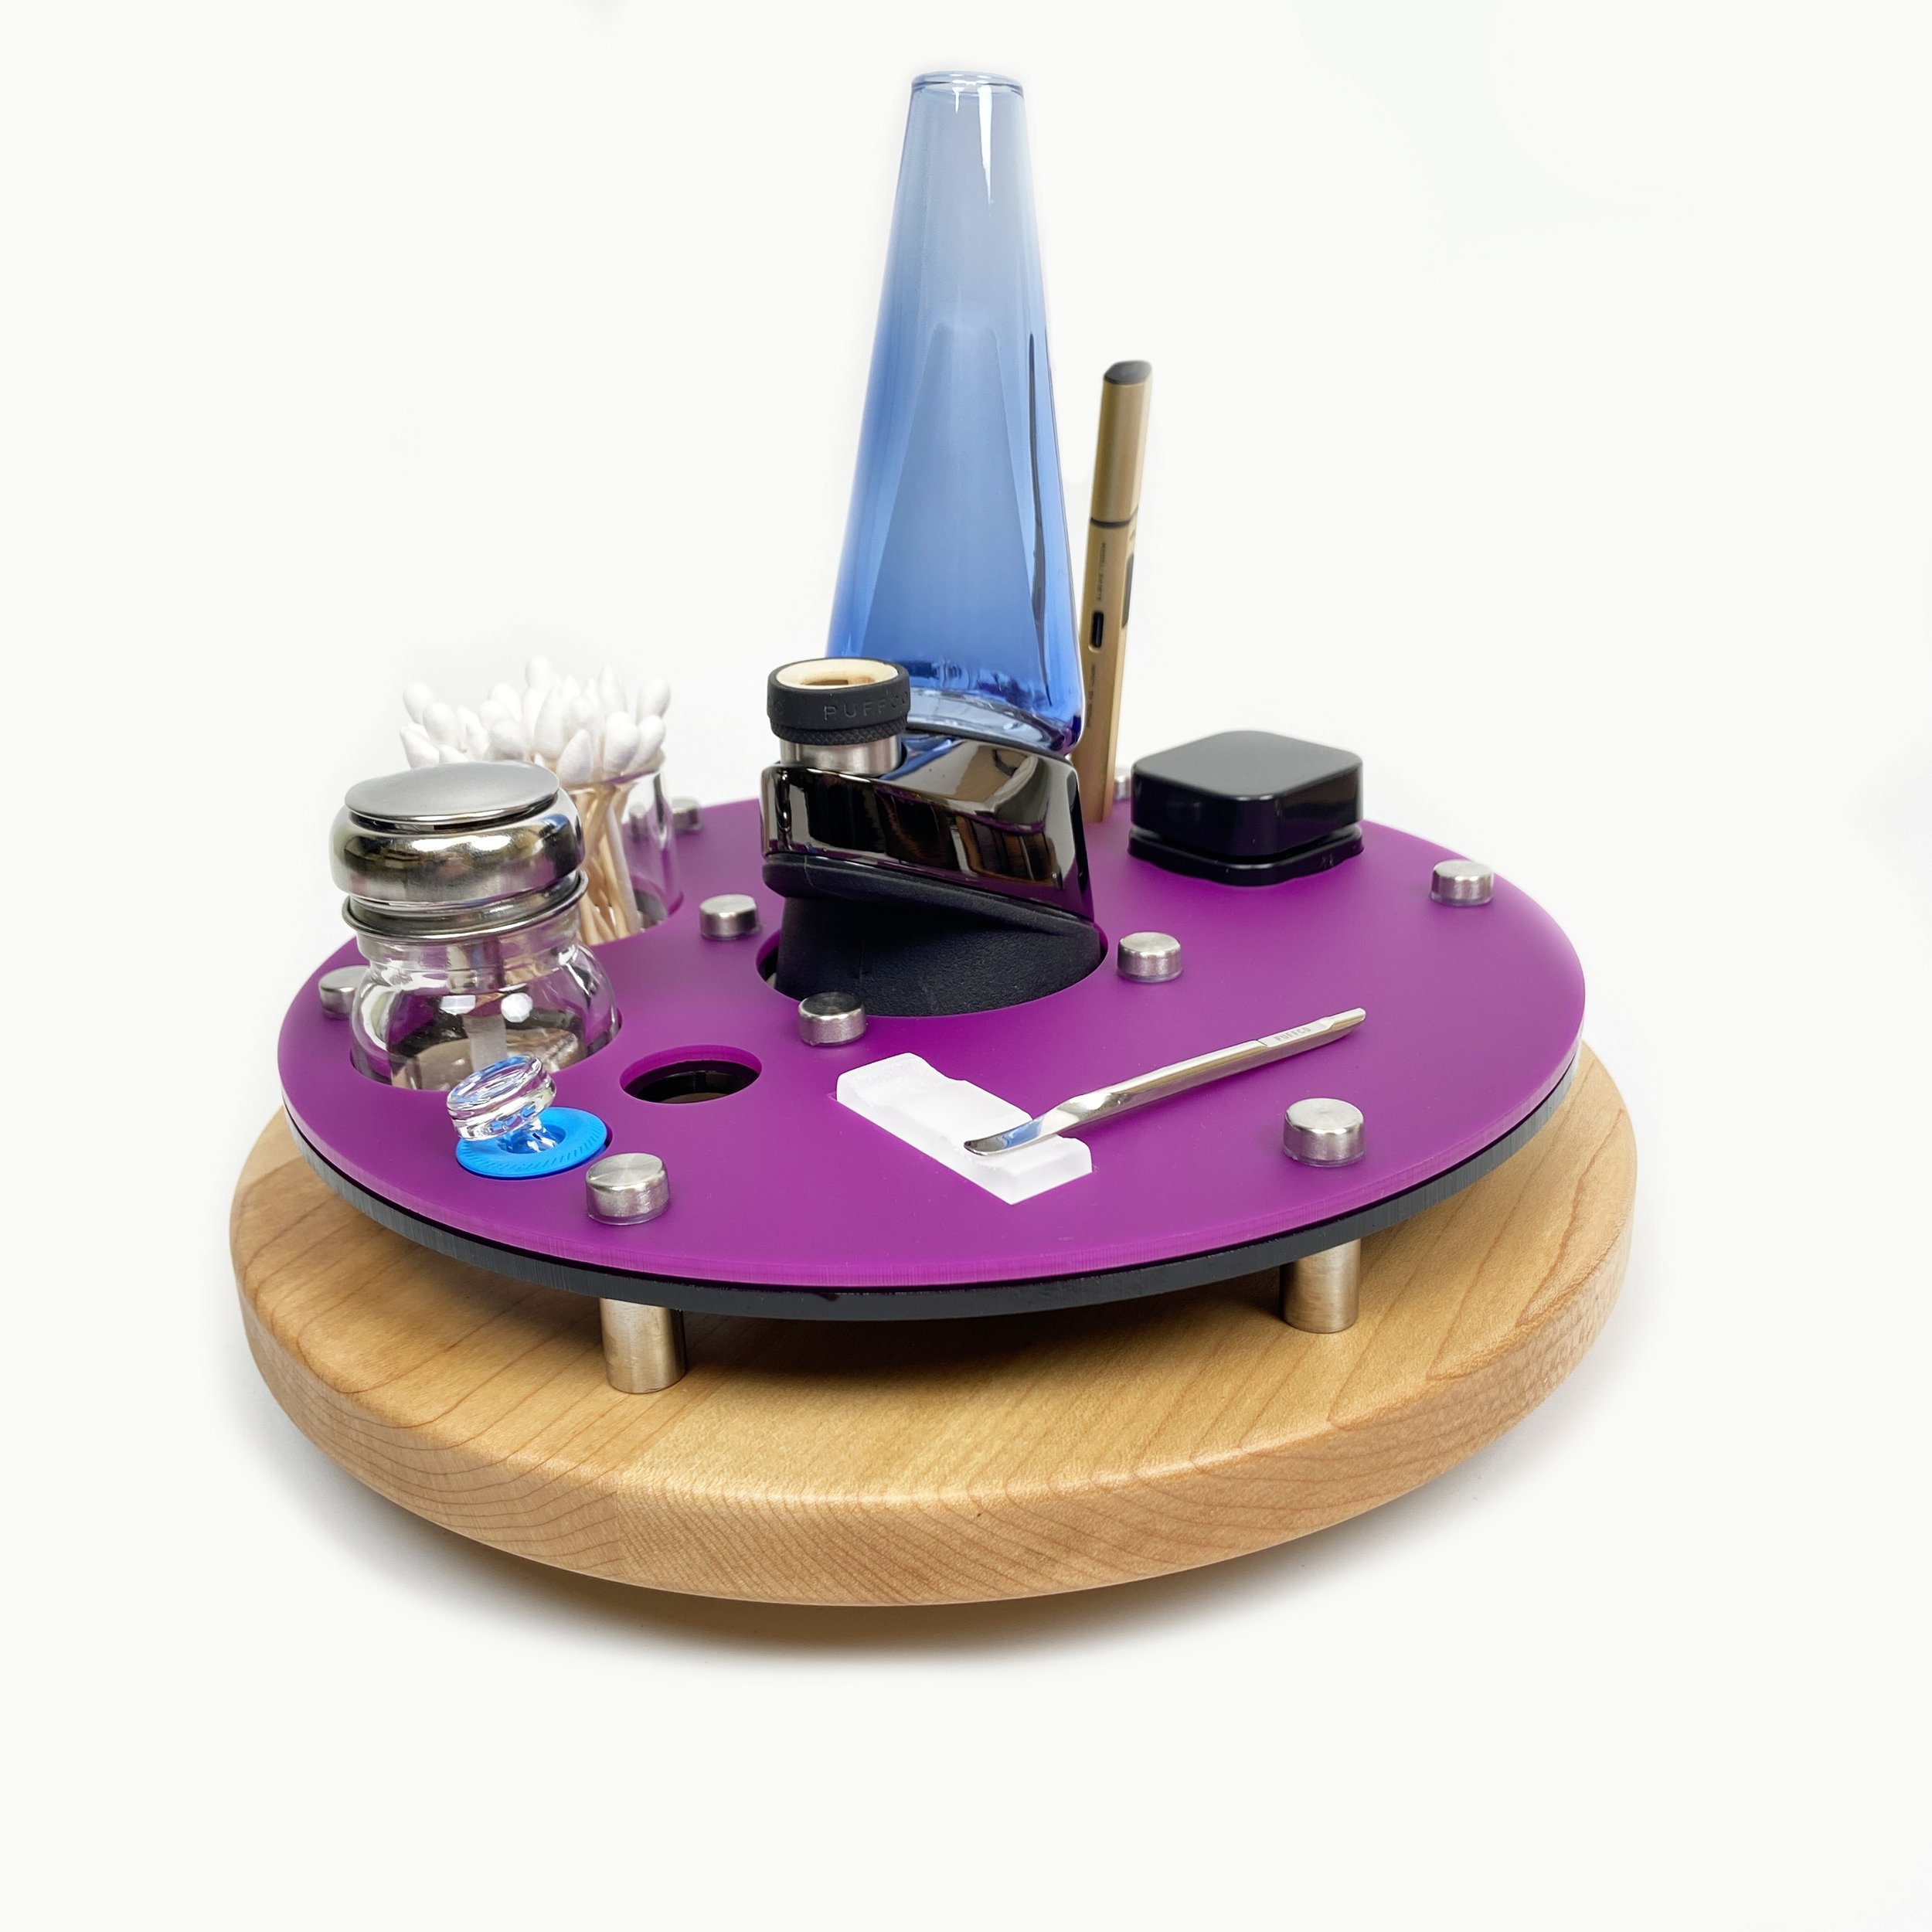 The Puffco Get Lit Programmable RGB LED Dab Rig Station Tray for Peak